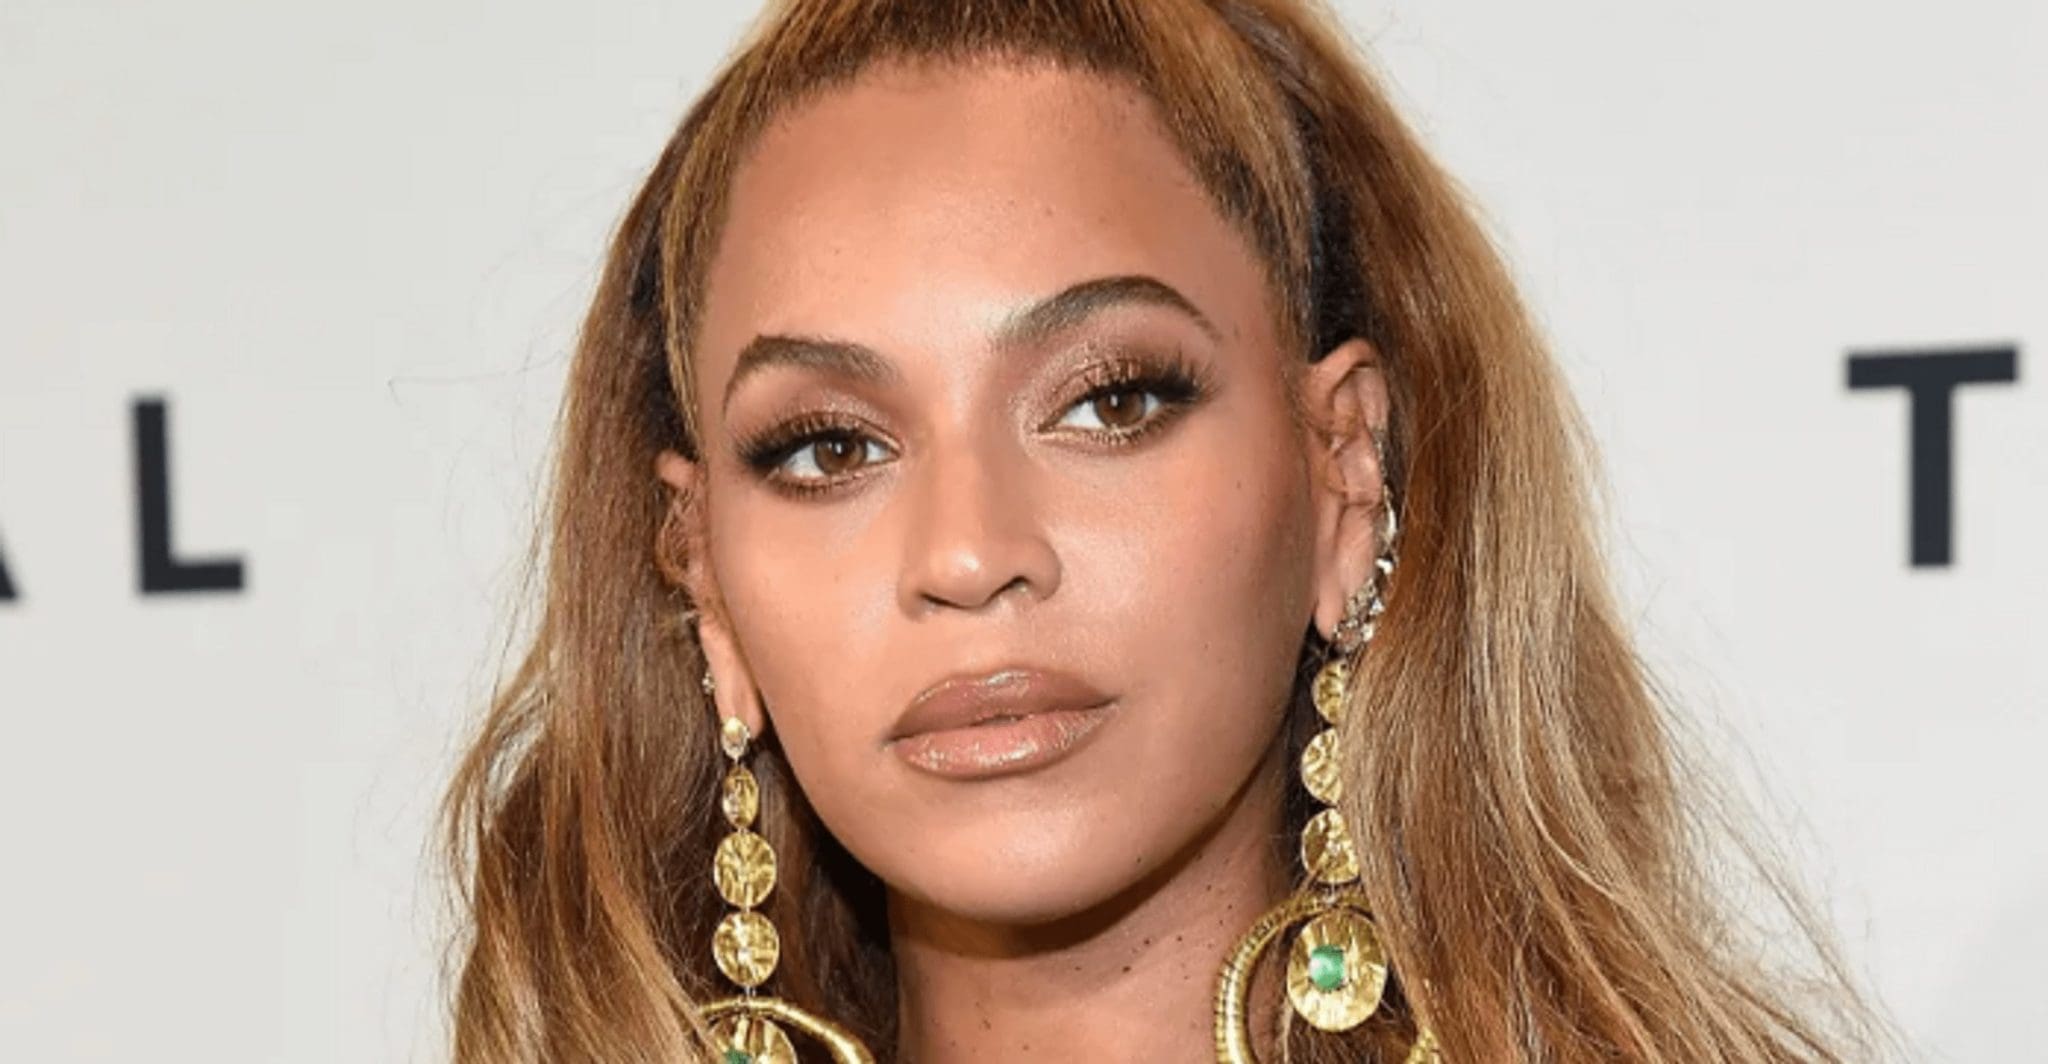 A Remix Of The Song "Break My Soul" By Beyoncé And Madonna Has Been Published